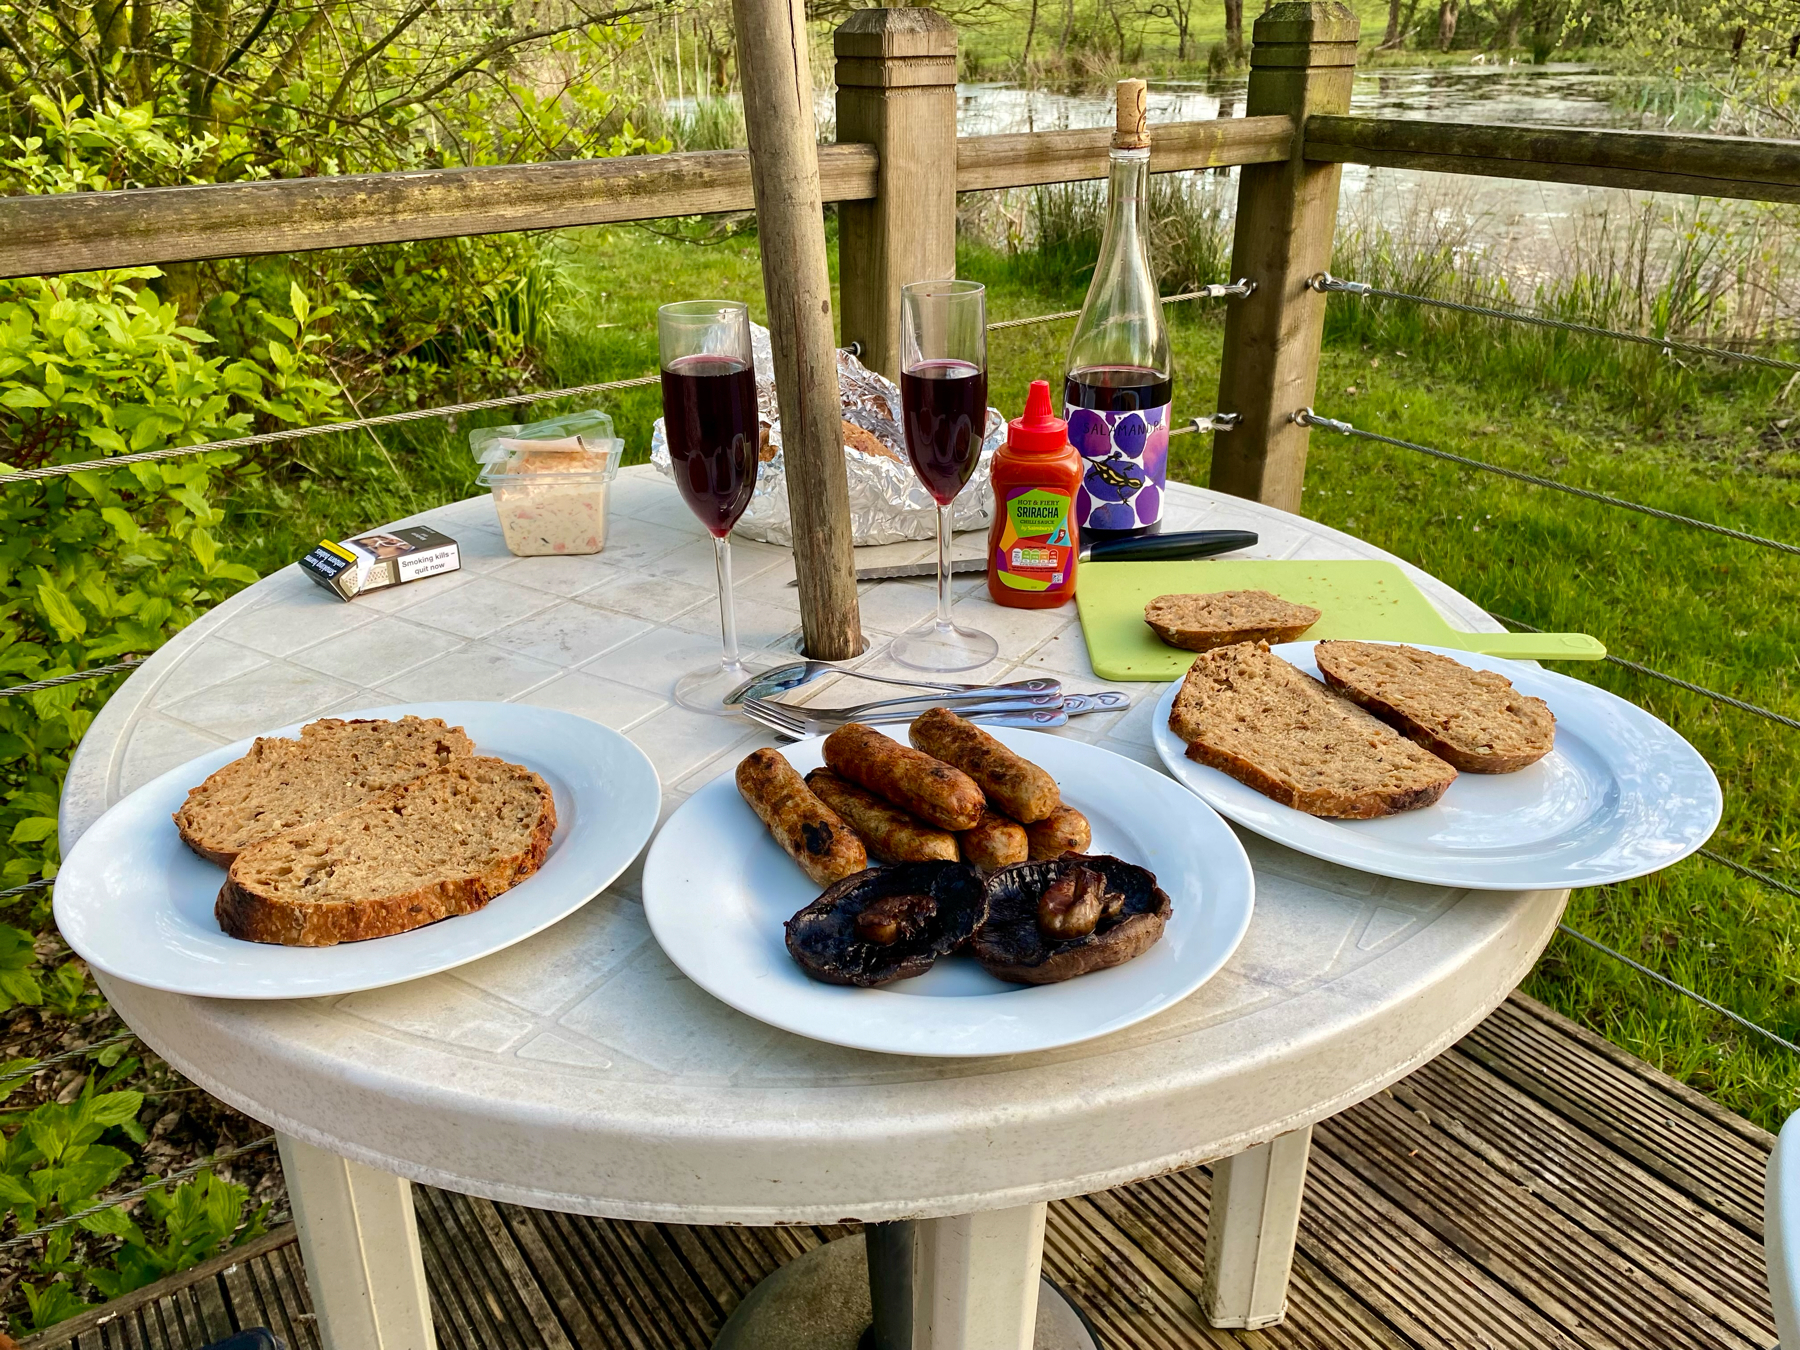 Outdoor meal setup with two glasses of red wine, a bottle, grilled sausages, slices of bread on plates, coleslaw, Sriracha sauce, and condiments on a white round table with a natural backdrop.